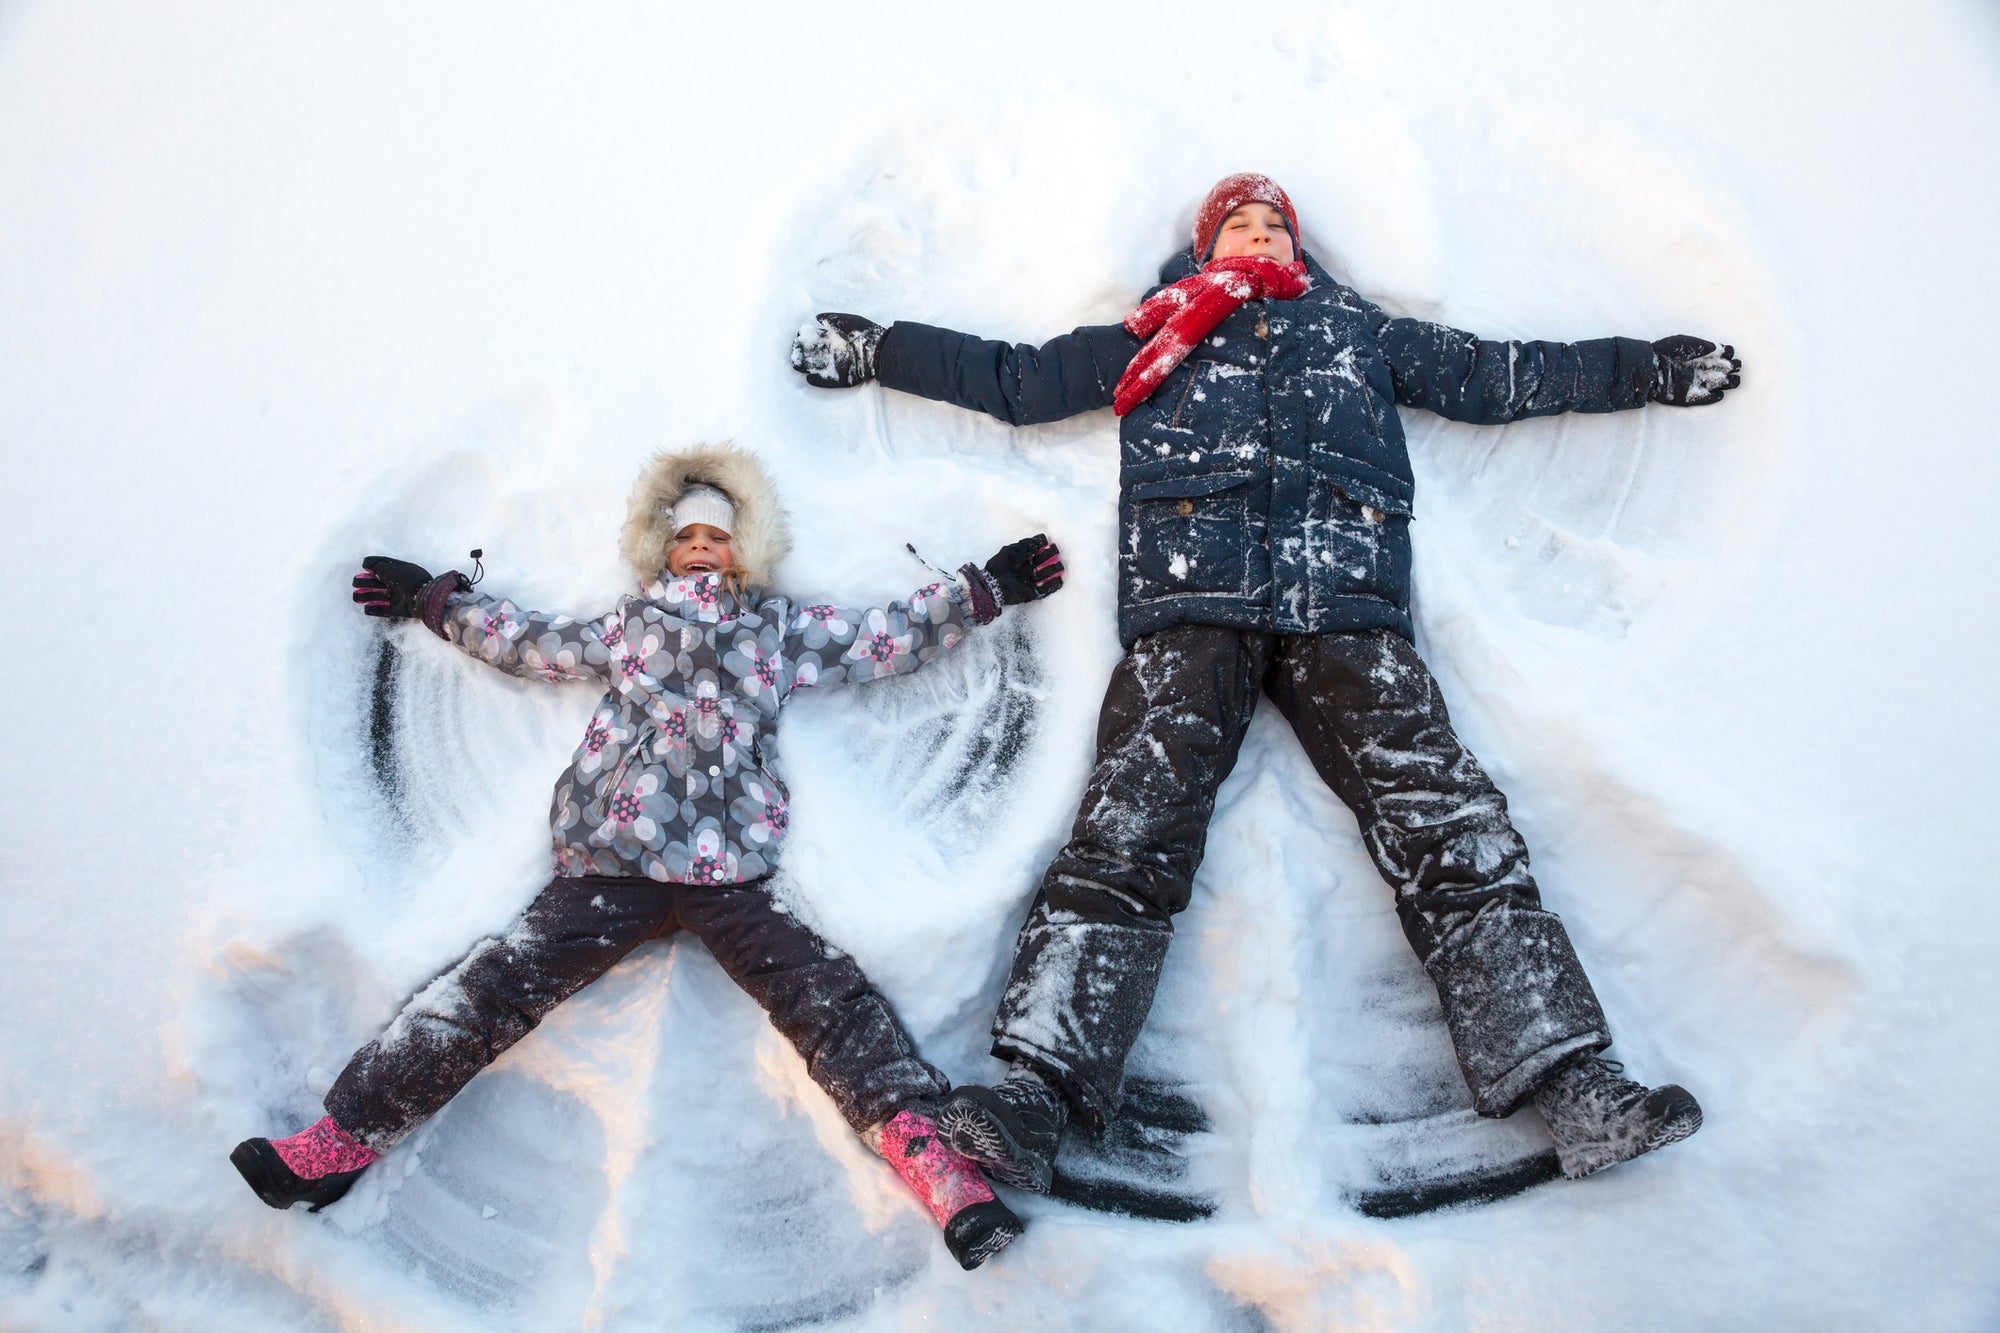 Two children playing in snow